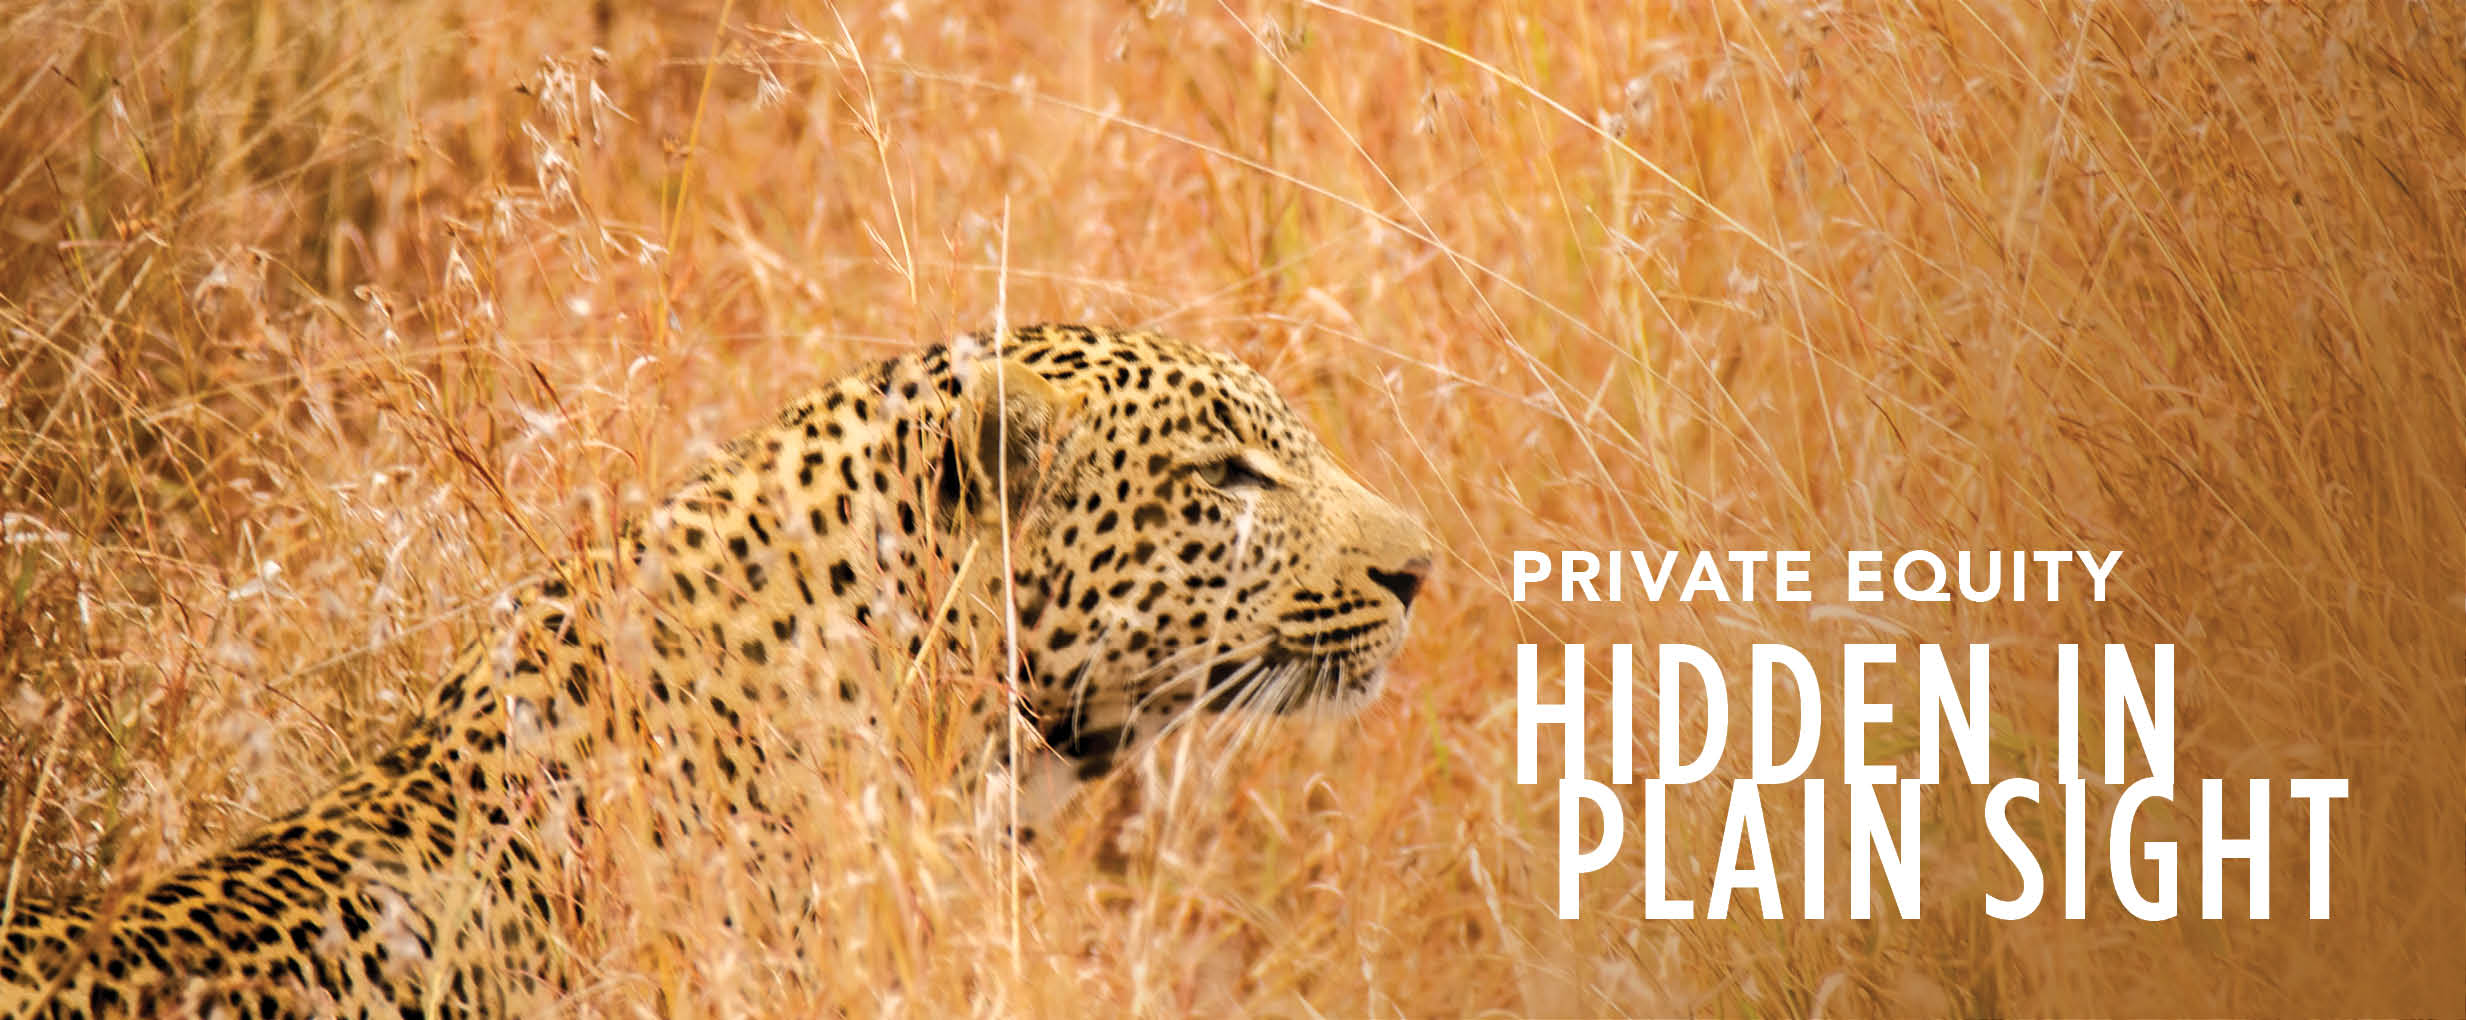 Hidden in Plain Sight: Private Equity, Part 1